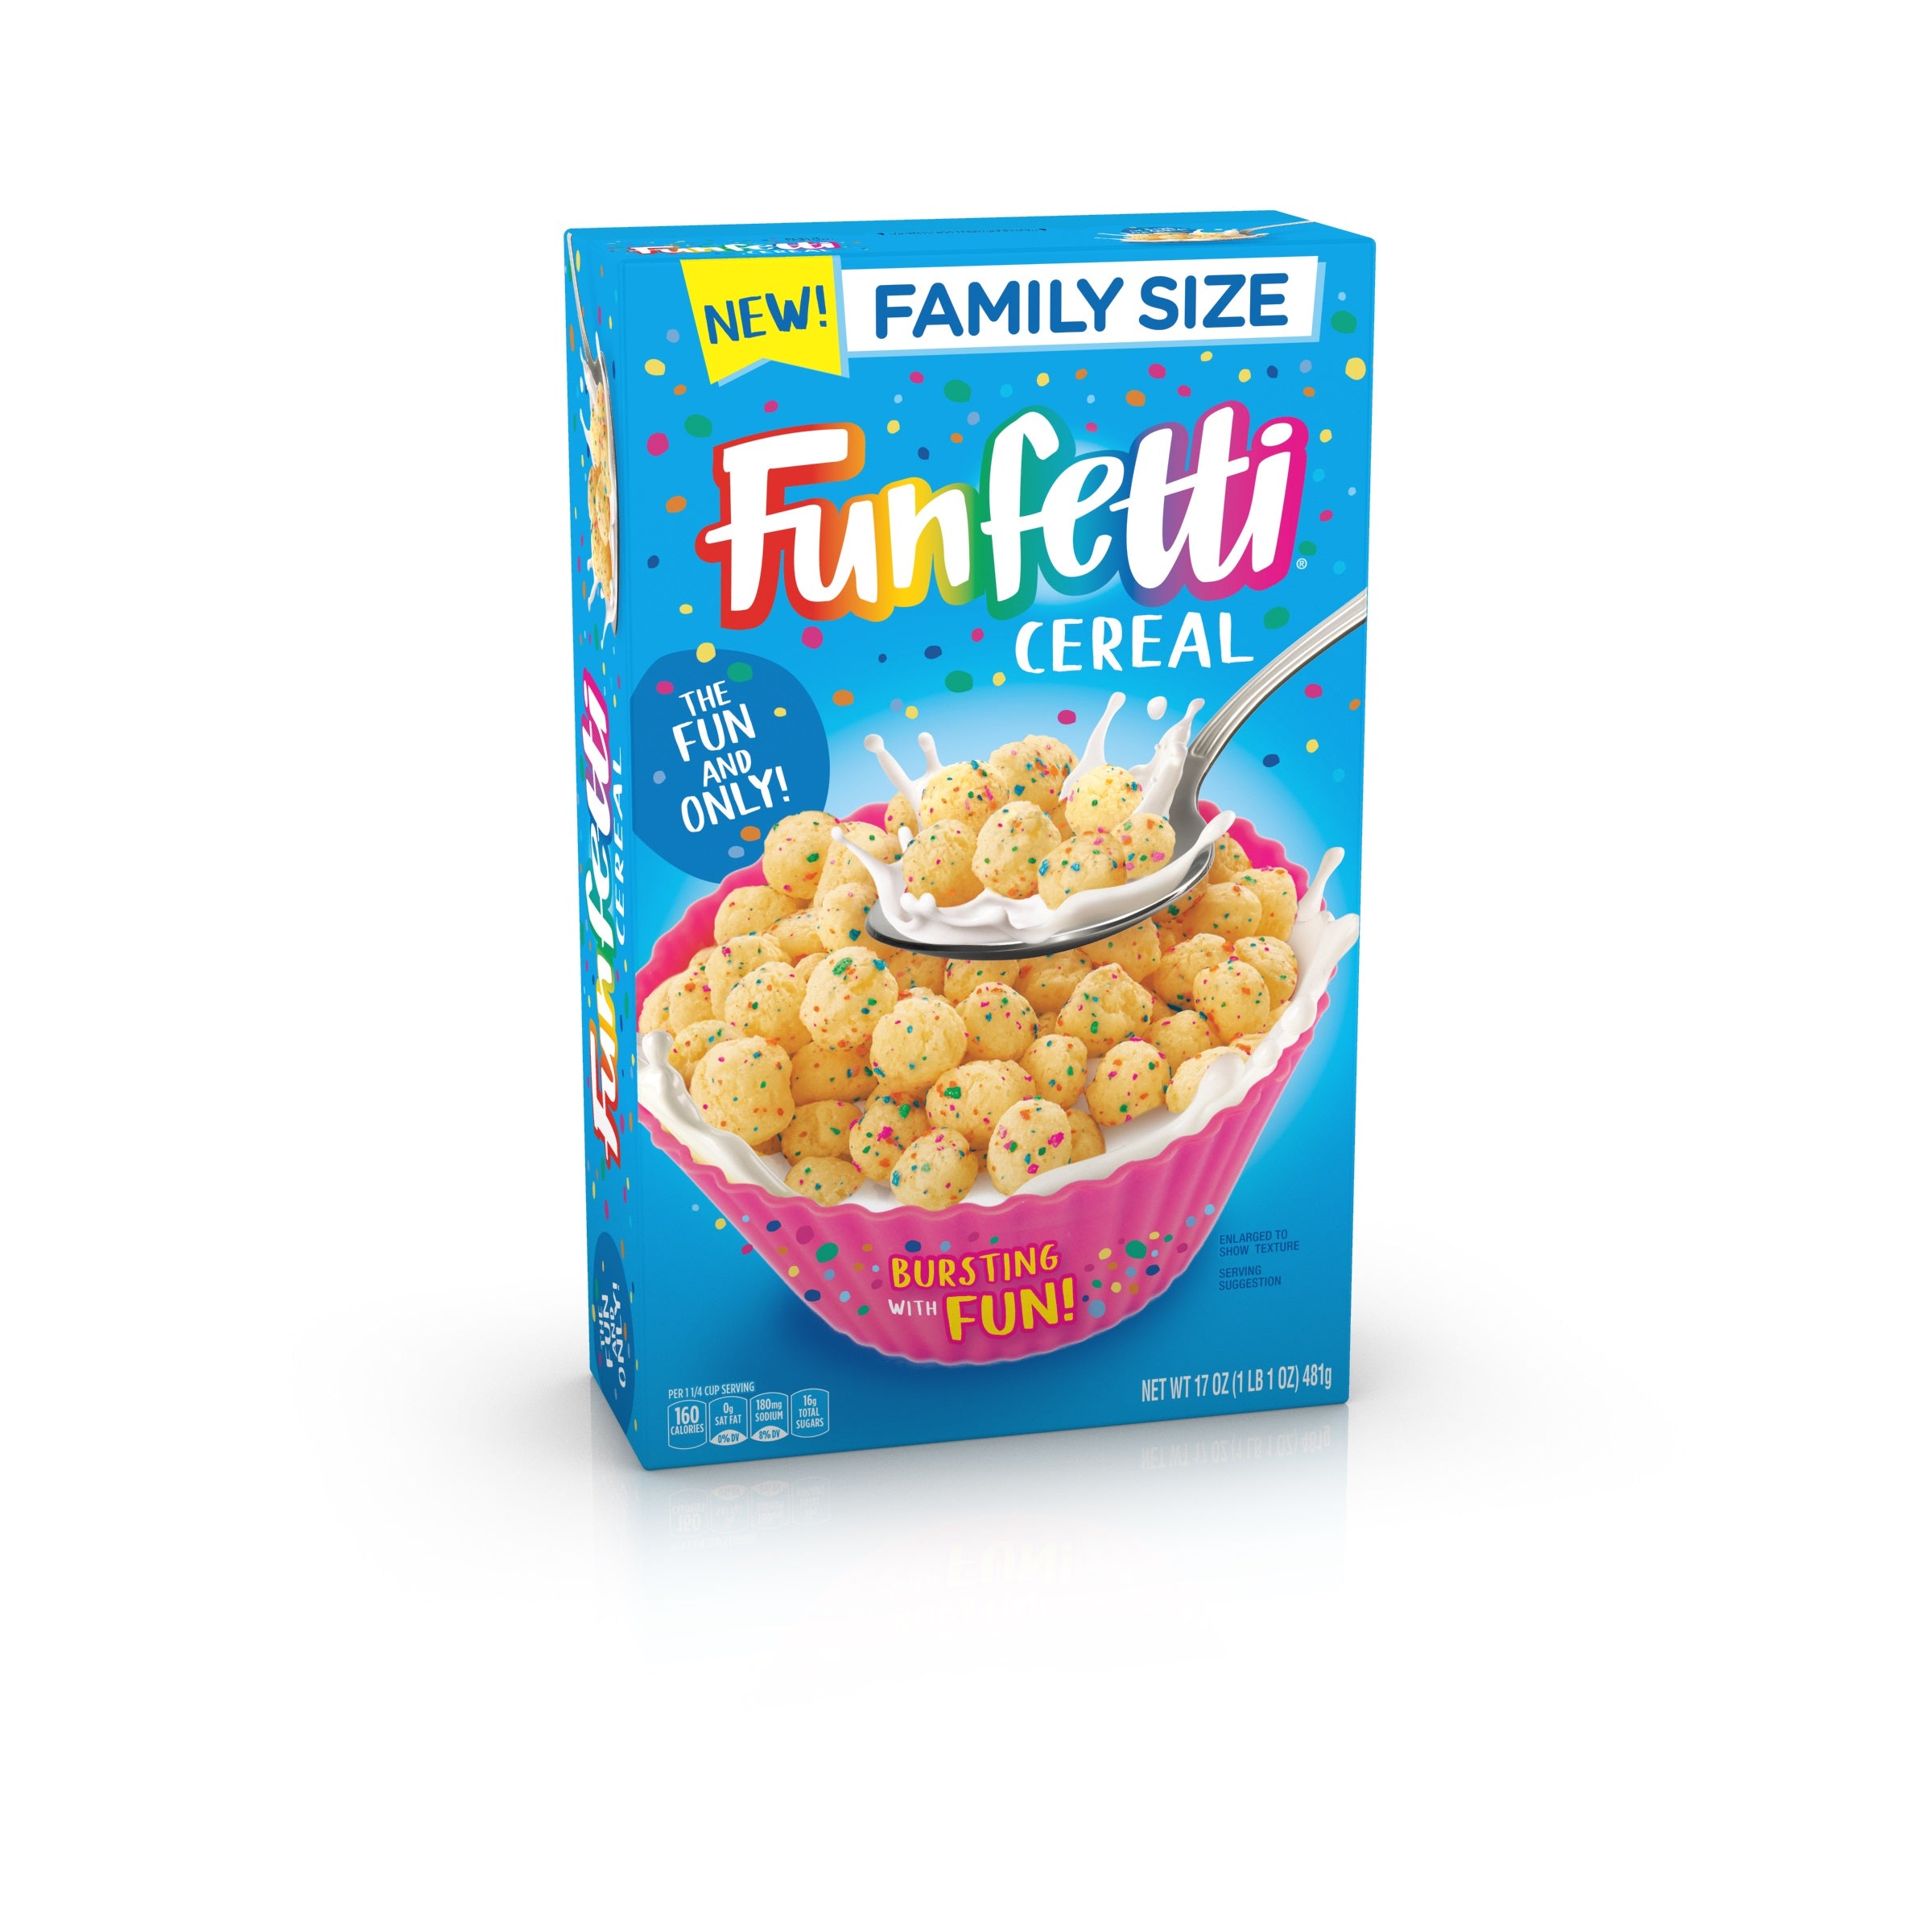 Funfetti Cereal 481g - Best before 28th November 2021 - £1.99